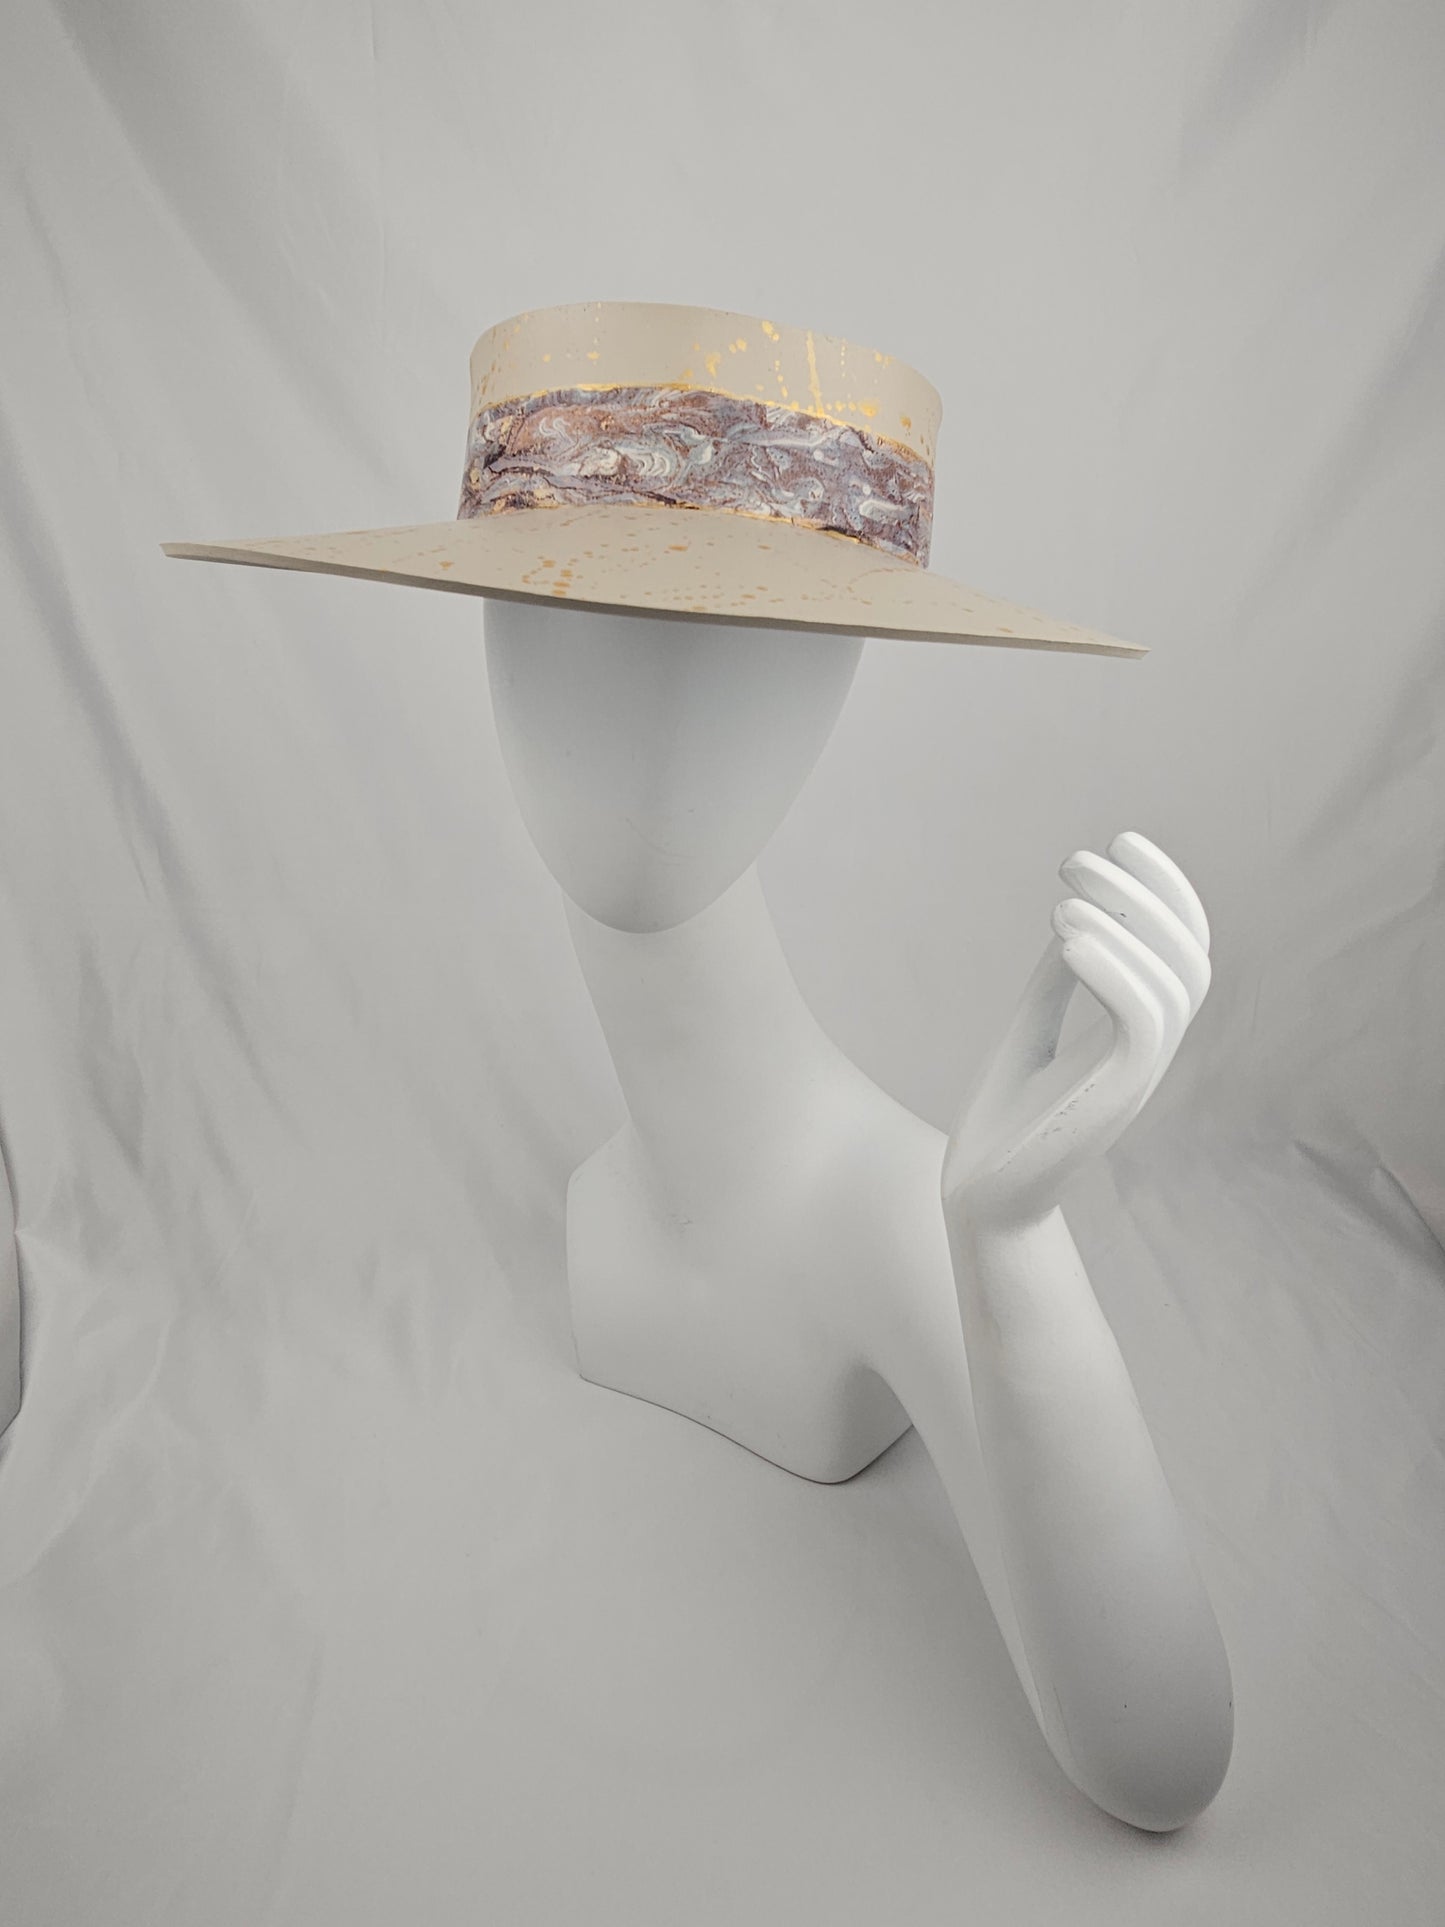 Truly Taupe Audrey Foam Sun Visor Hat with Marbled Grey Band and Gold Splatter Effect: 1940s, Walks, Brunch, Tea, Golf, Easter, Church, No Headache, Derby